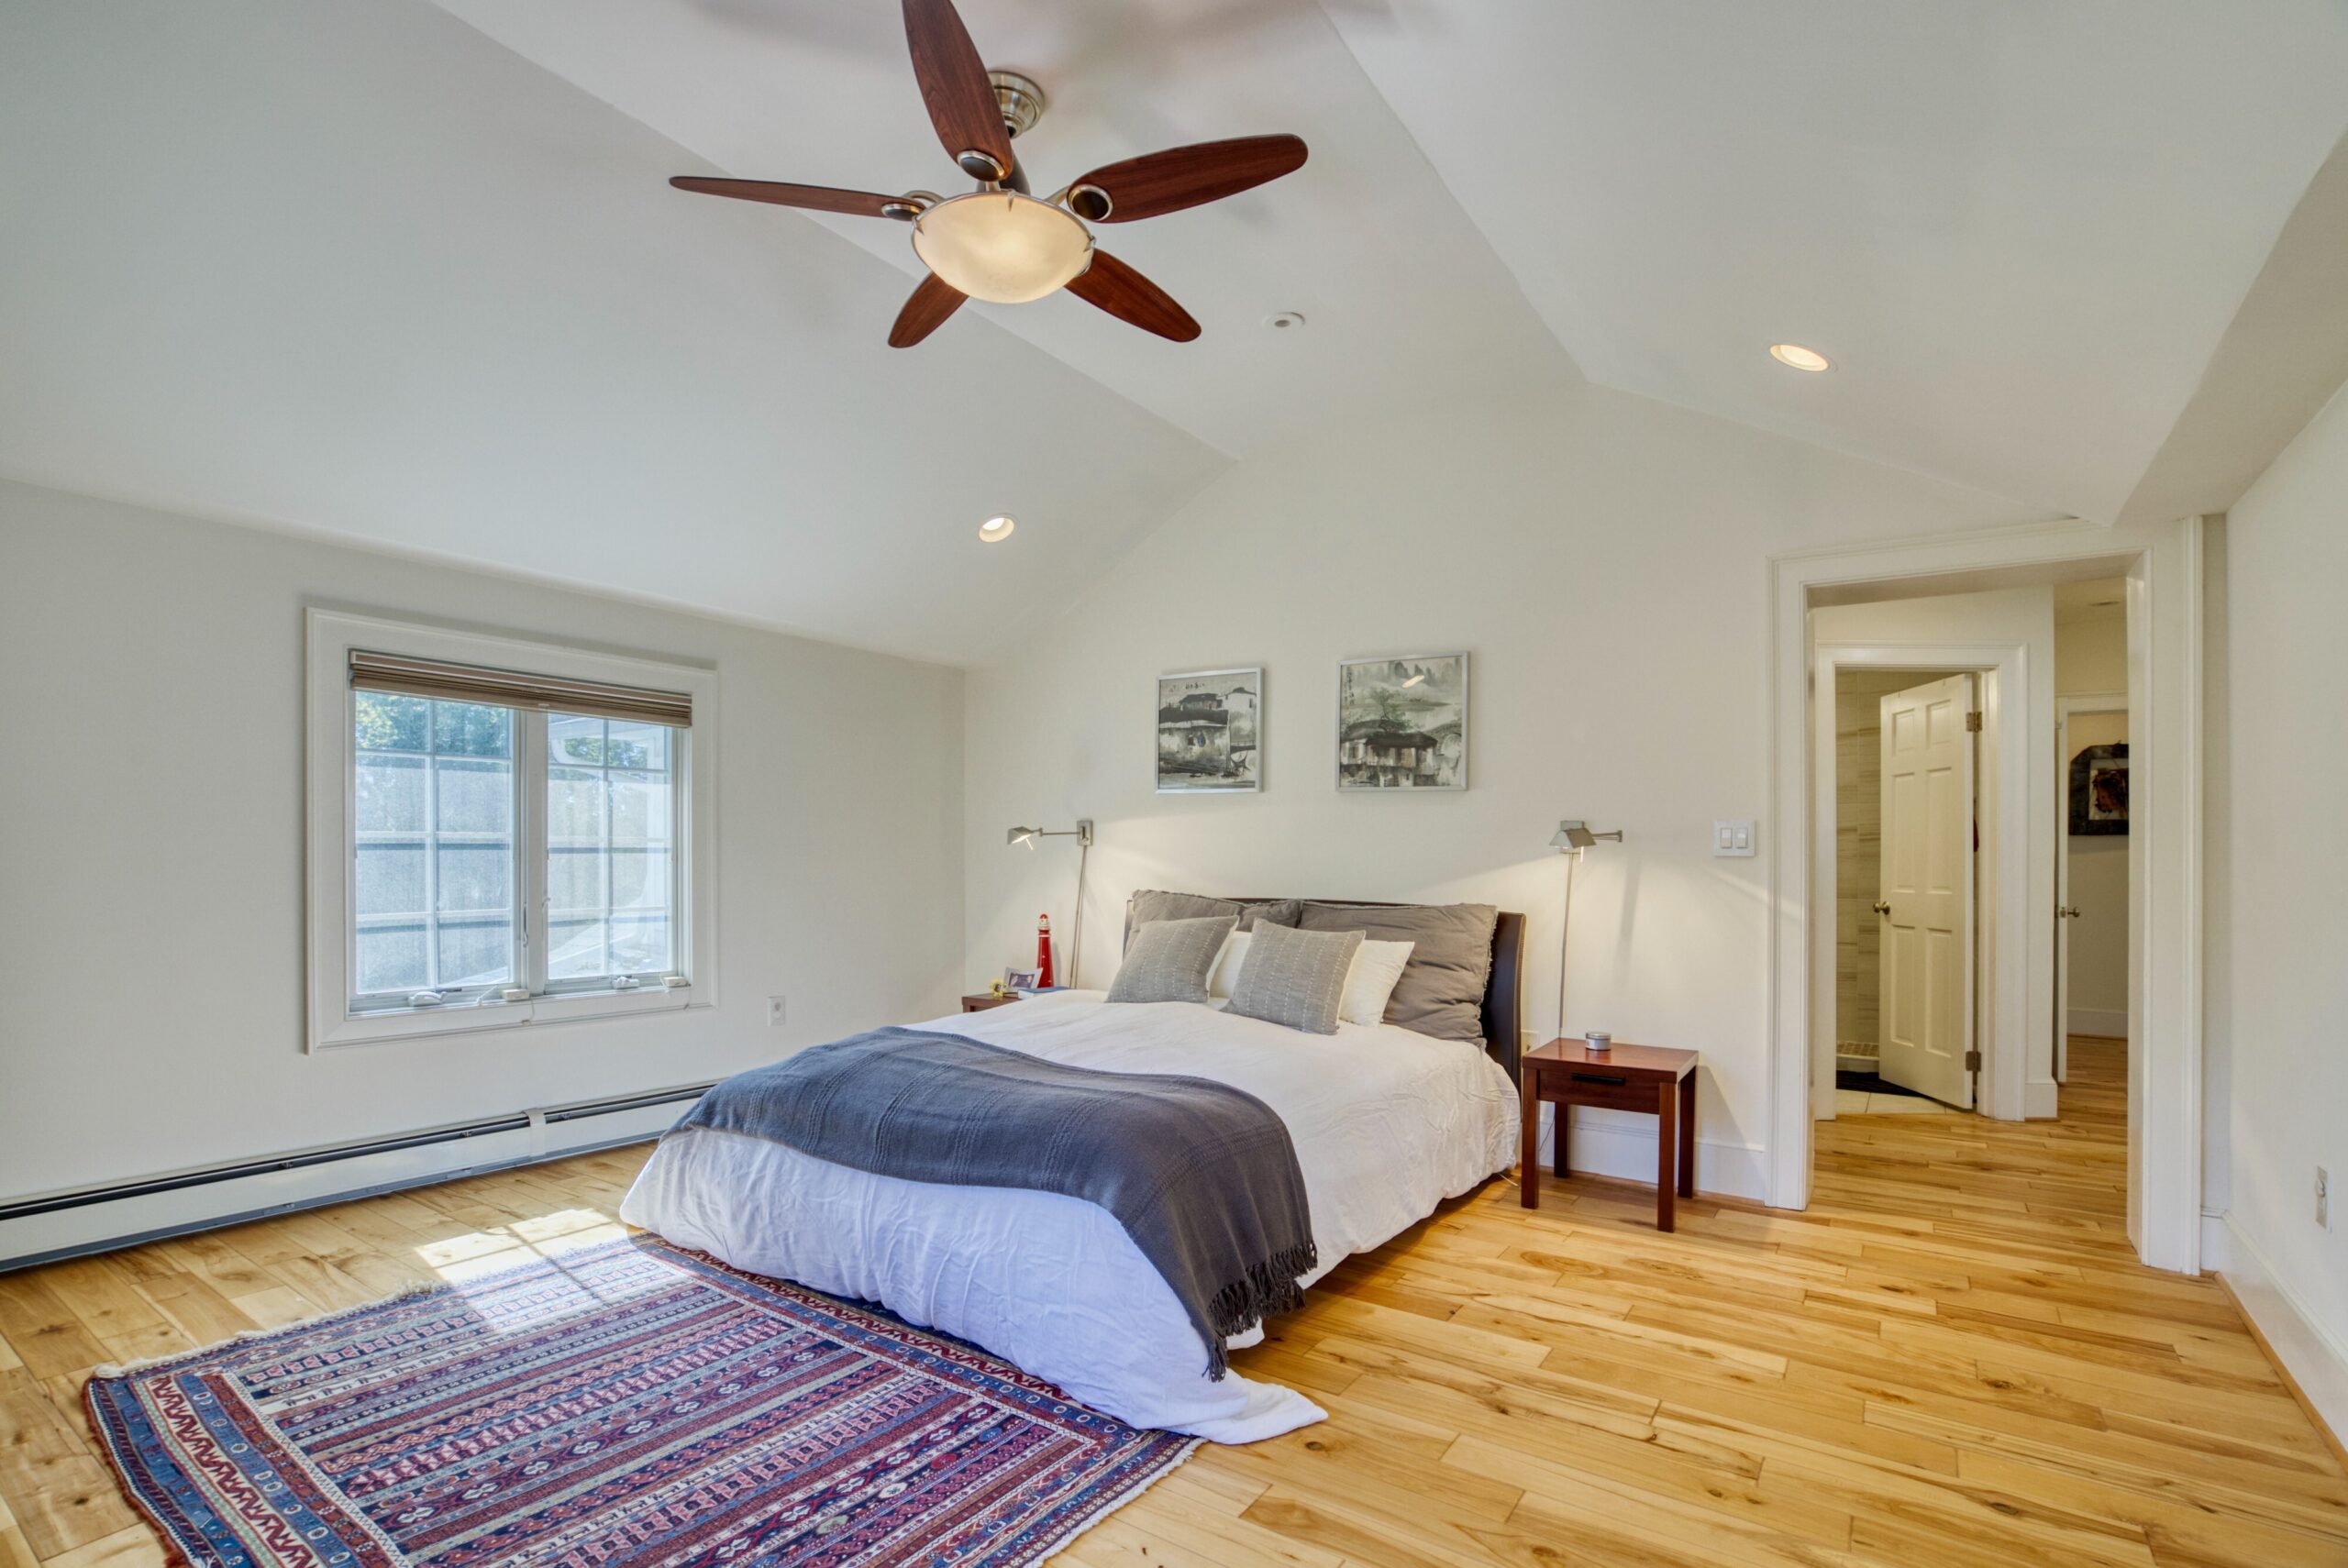 Interior professional photo of 1826 Varnum St NW - showing the master bedroom with cathedral ceiling and hardwood floors